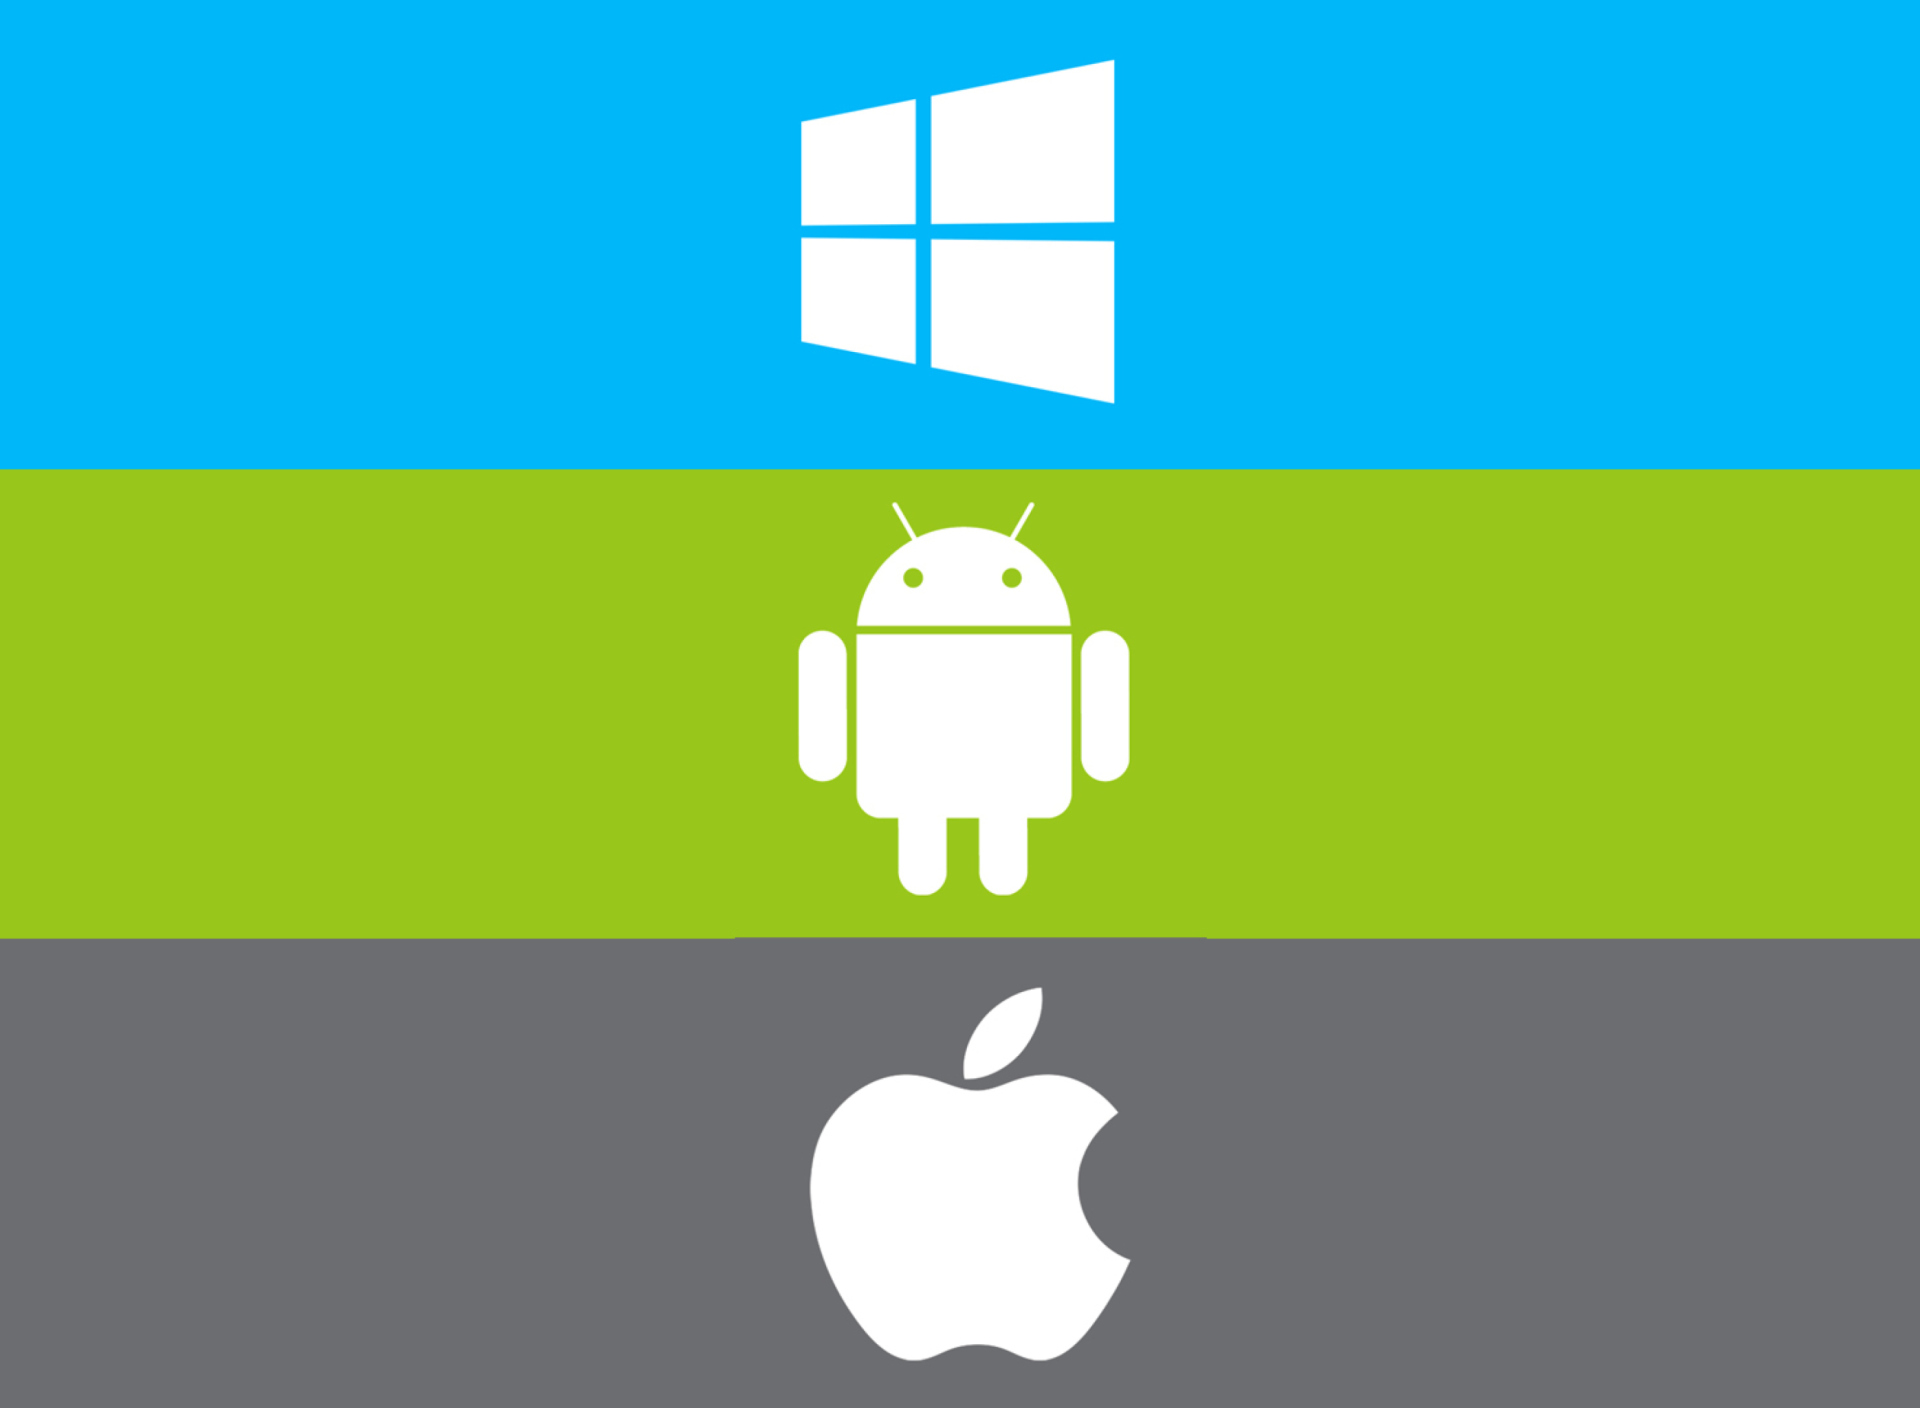 Windows, Apple, Android - What's Your Choice? screenshot #1 1920x1408